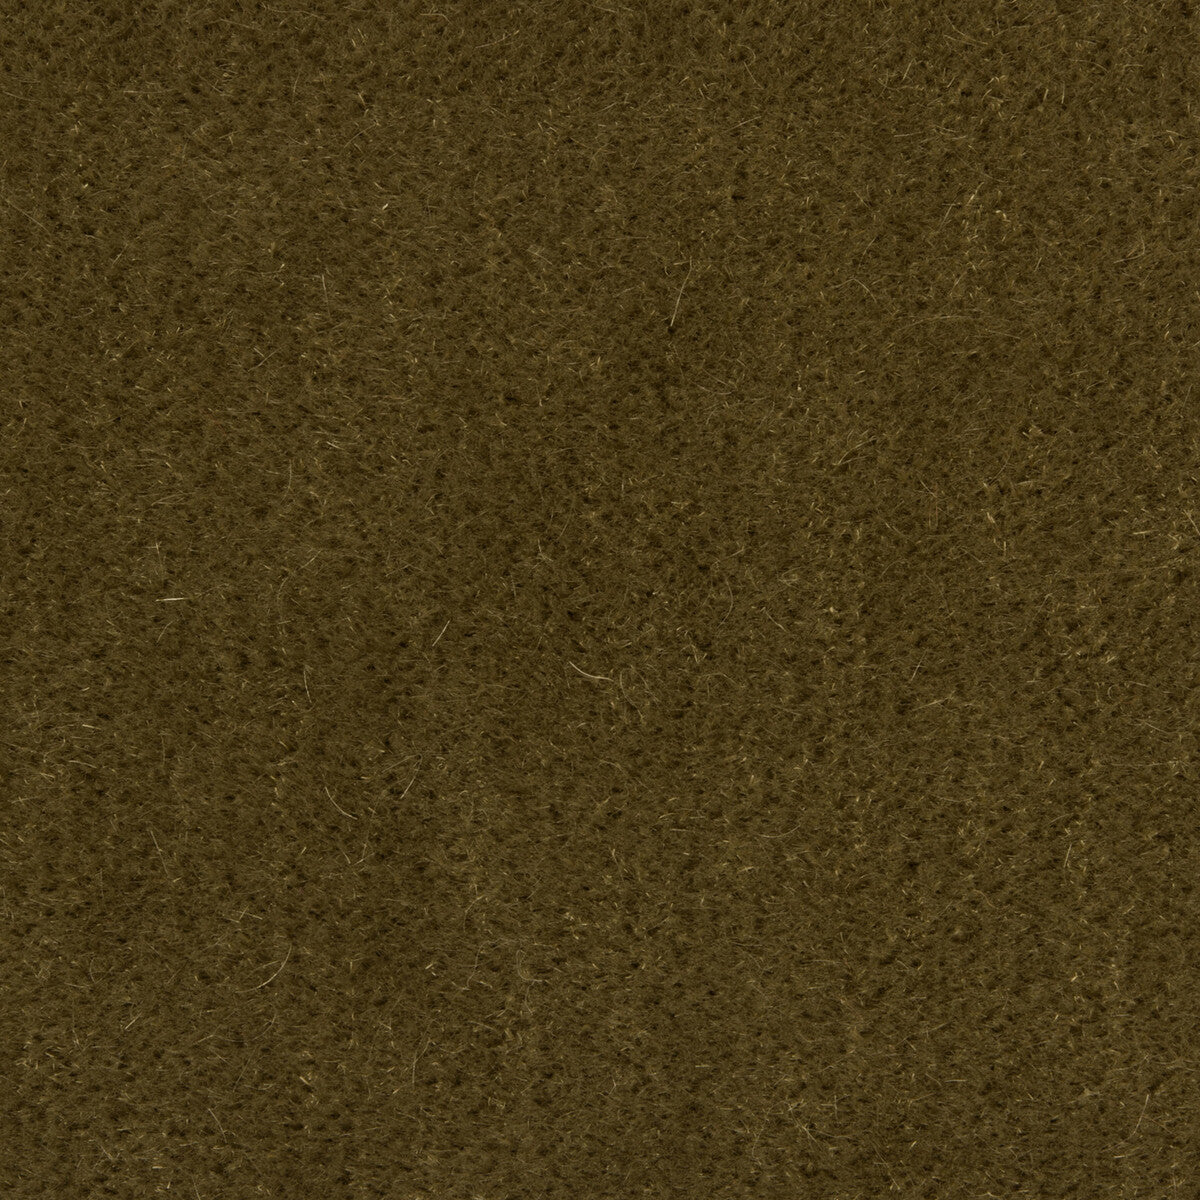 Bachelor Mohair fabric in khaki color - pattern 8014101.113.0 - by Brunschwig &amp; Fils